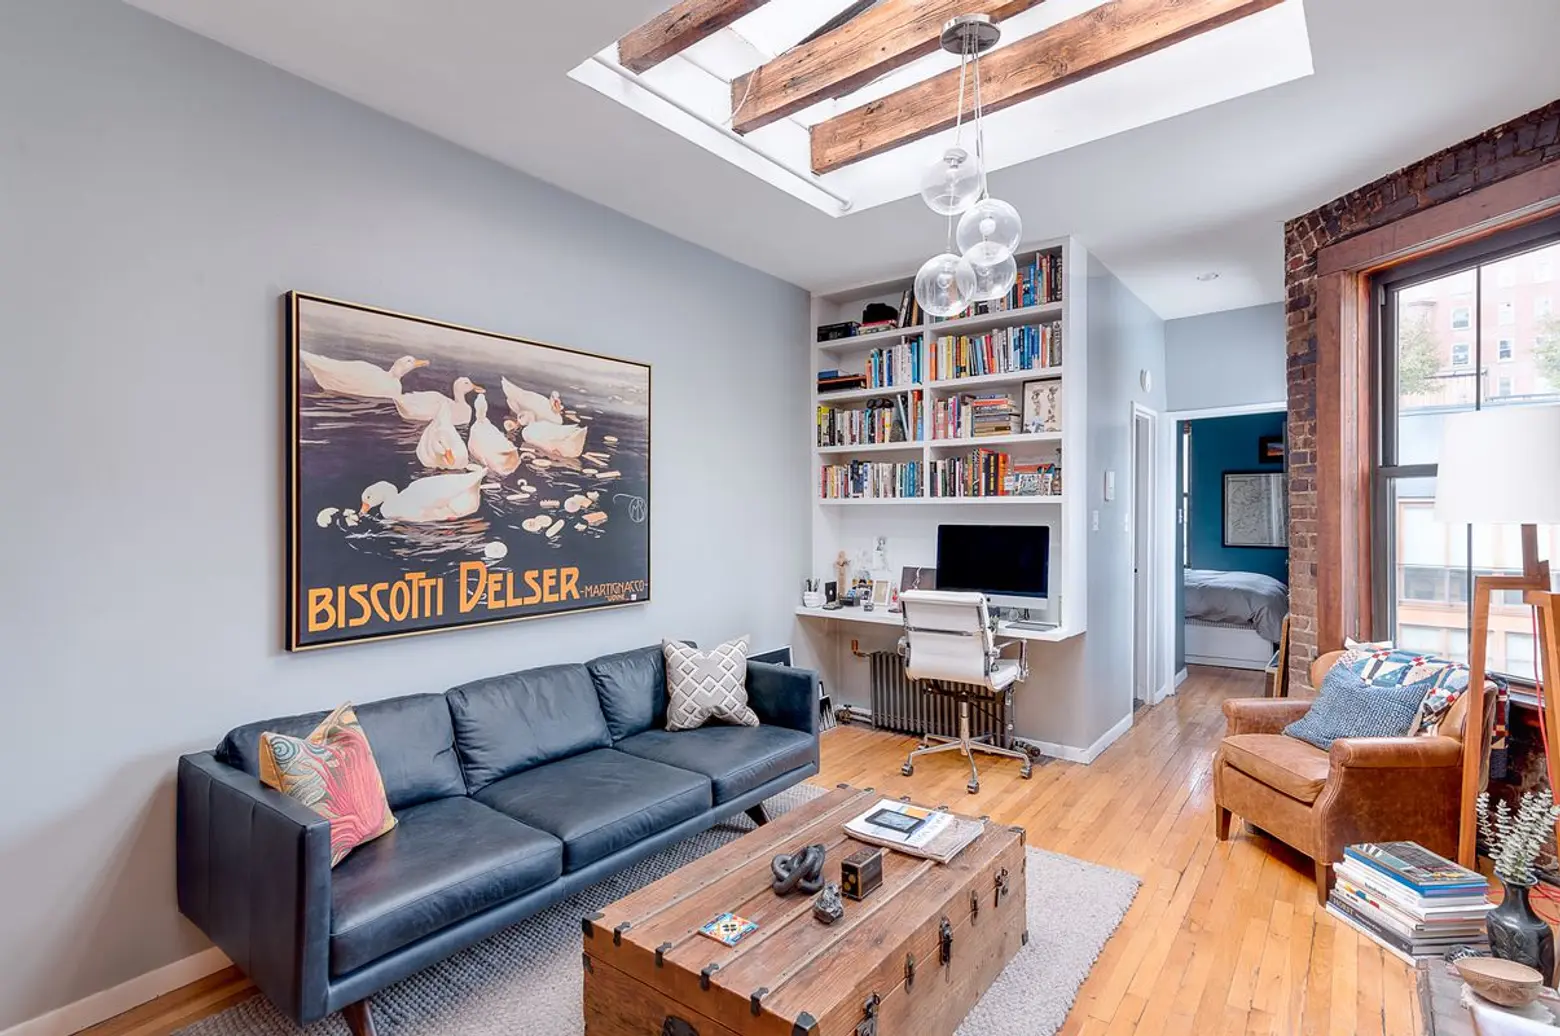 221 West 21st Street, Chelsea, Cool Listings, Homepolish, small space design, tiny apartments, co-ops, interiors